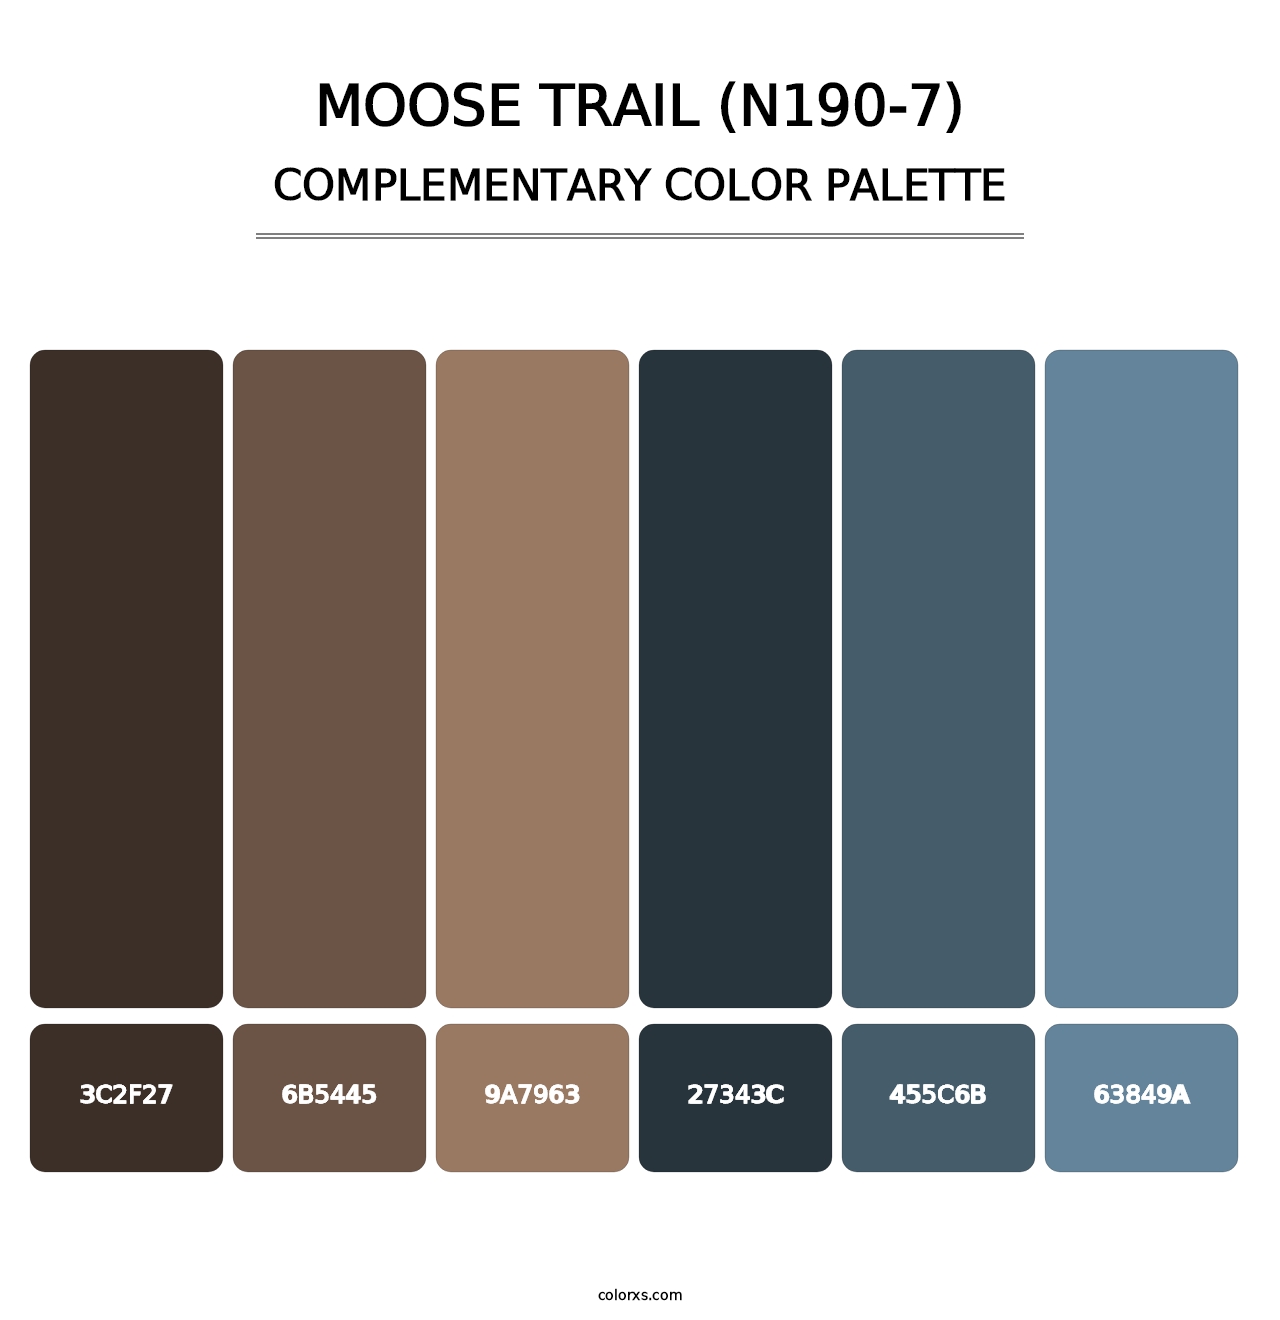 Moose Trail (N190-7) - Complementary Color Palette